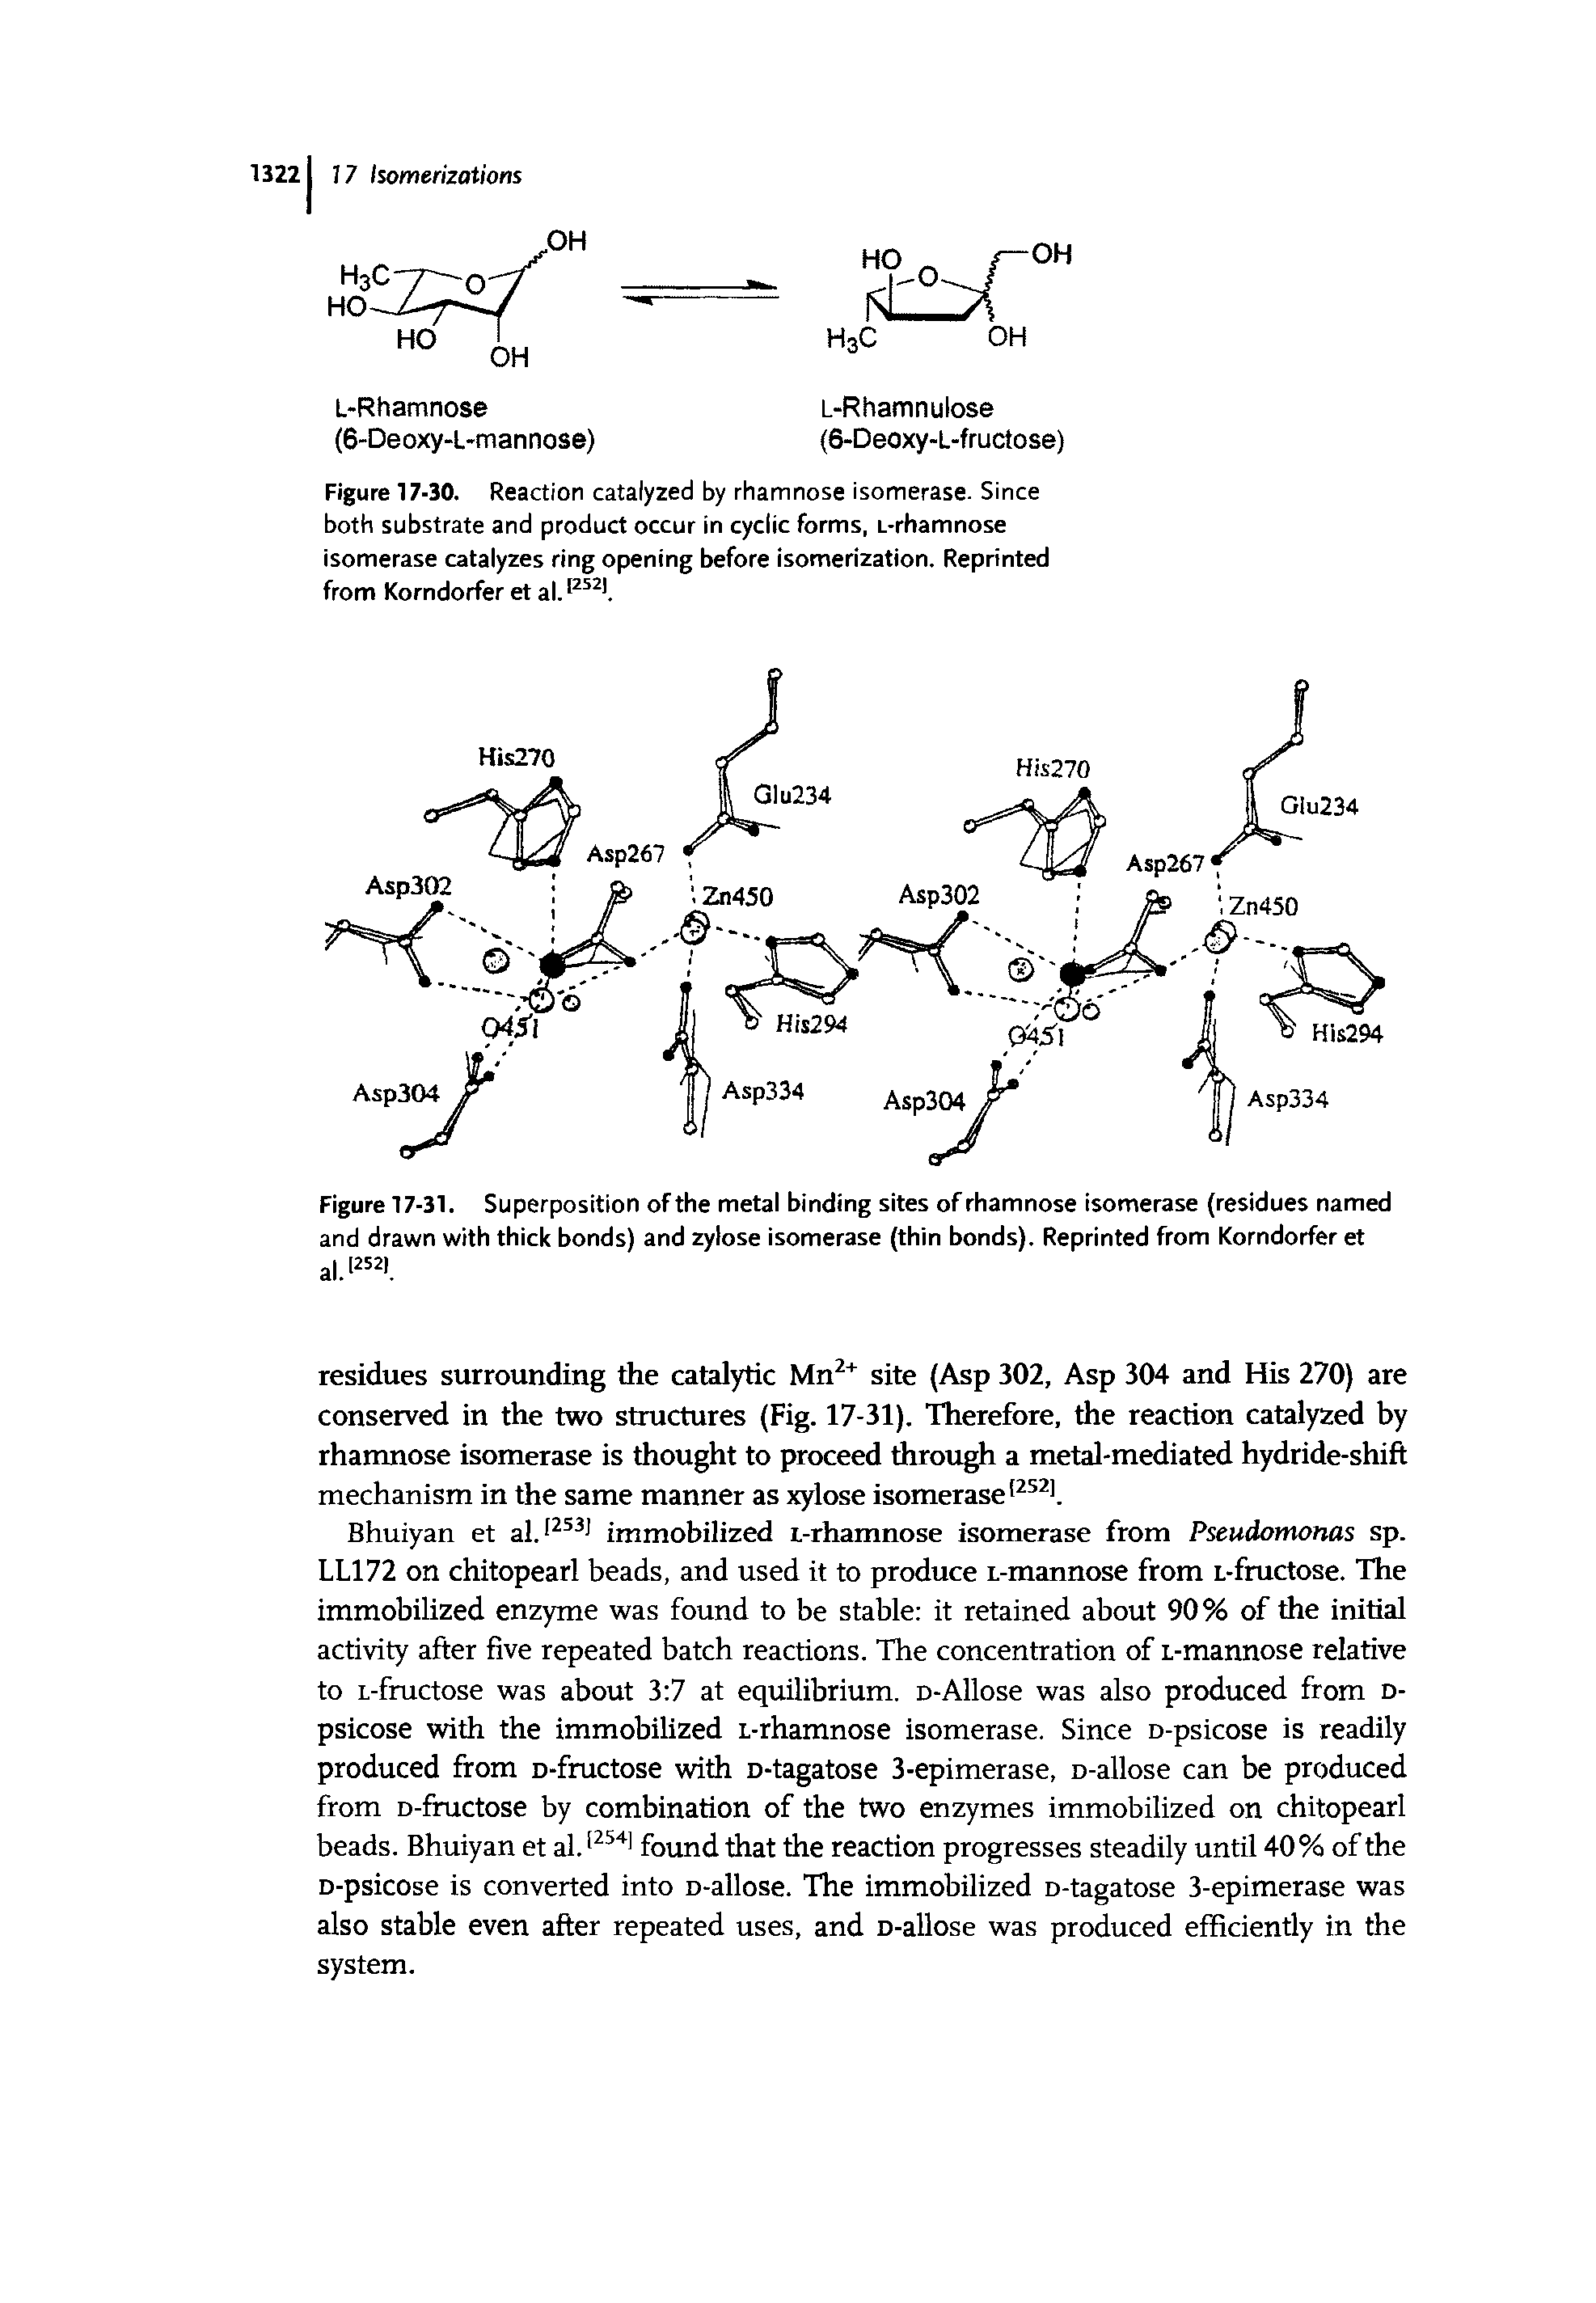 Figure 17-31. Superposition of the metal binding sites of rhamnose isomerase (residues named and drawn with thick bonds) and zylose isomerase (thin bonds). Reprinted from Korndorfer et al. 252. ...